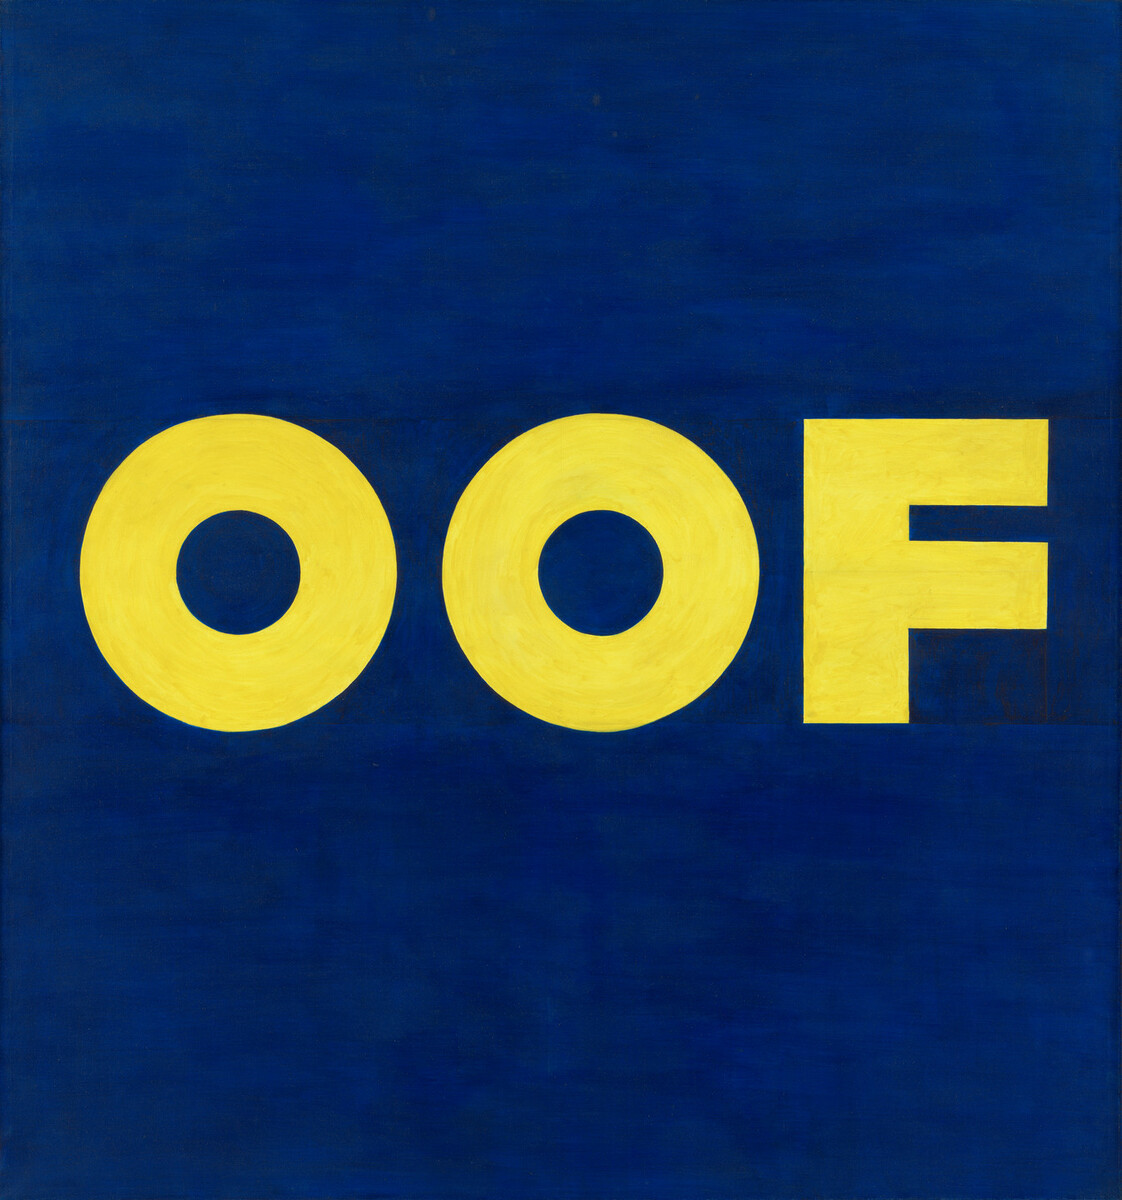 OOF moma.org/collection/wor…